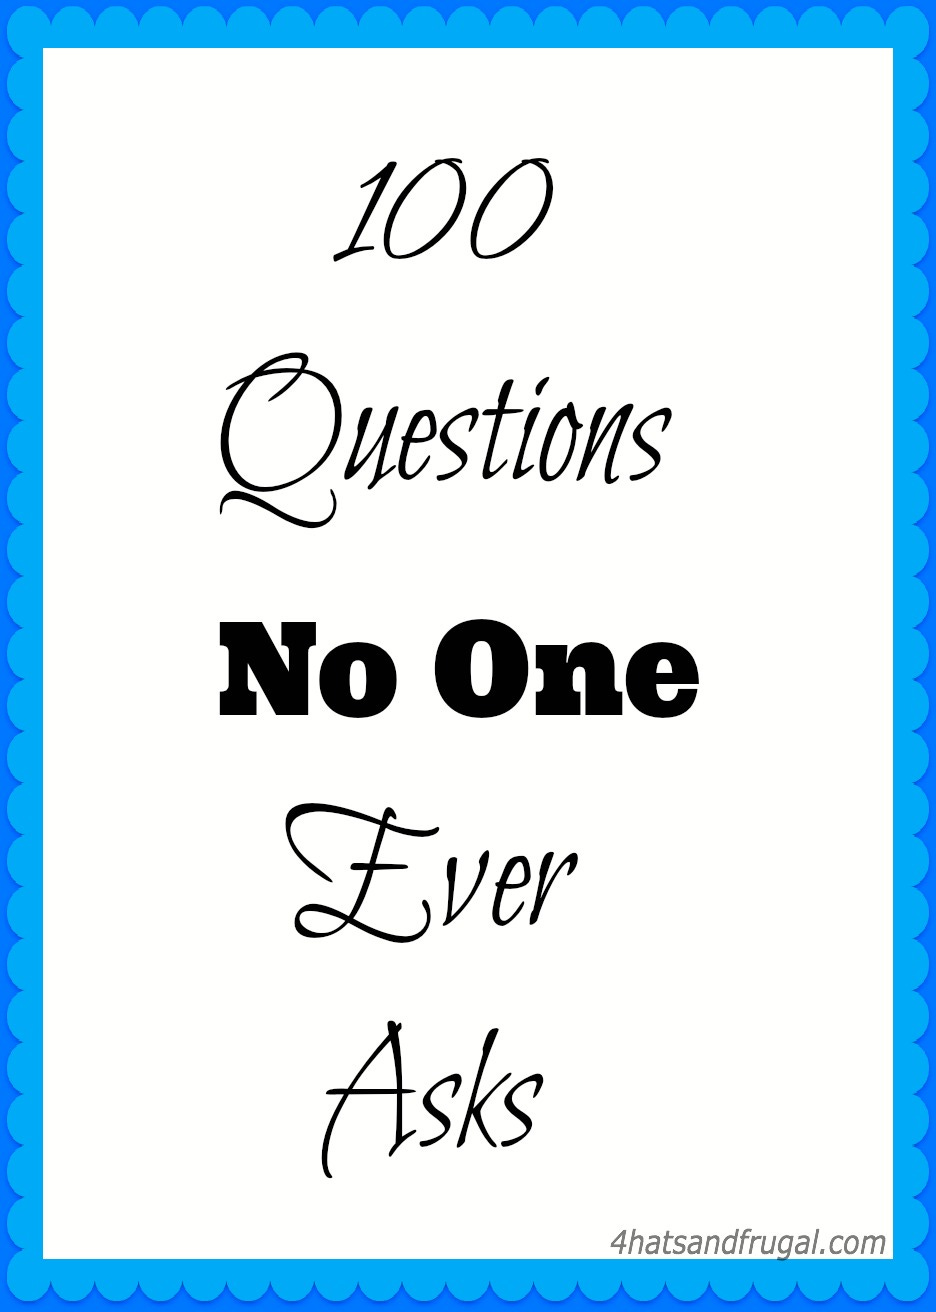 100 Questions No One Ever Asks - 4 Hats and Frugal